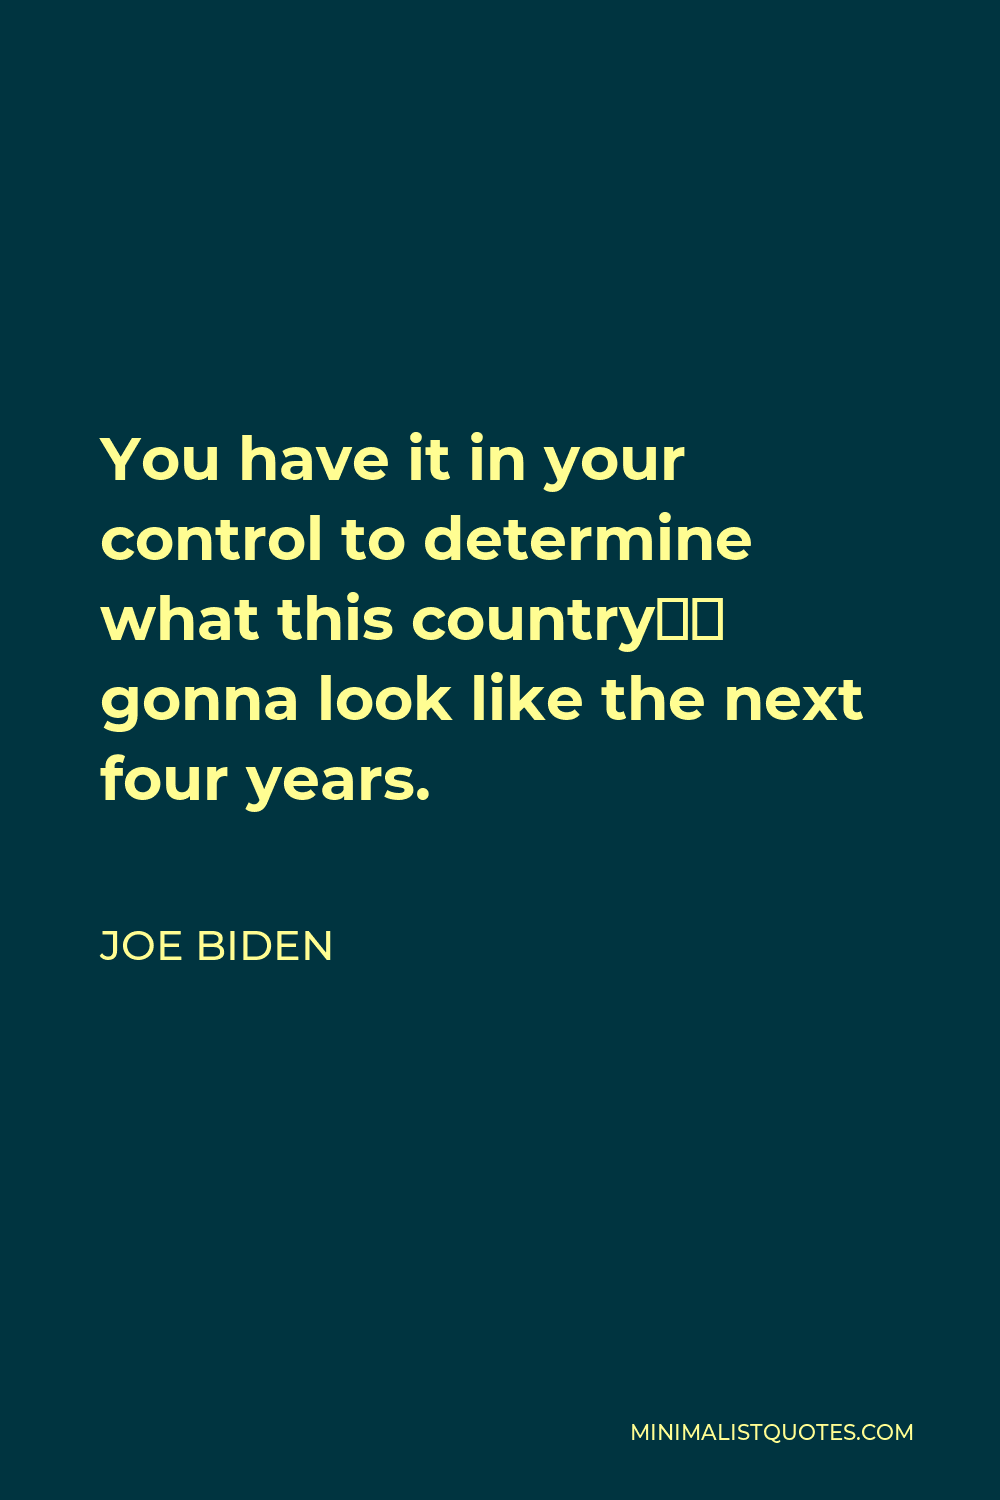 Joe Biden Quote - You have it in your control to determine what this country’s gonna look like the next four years.